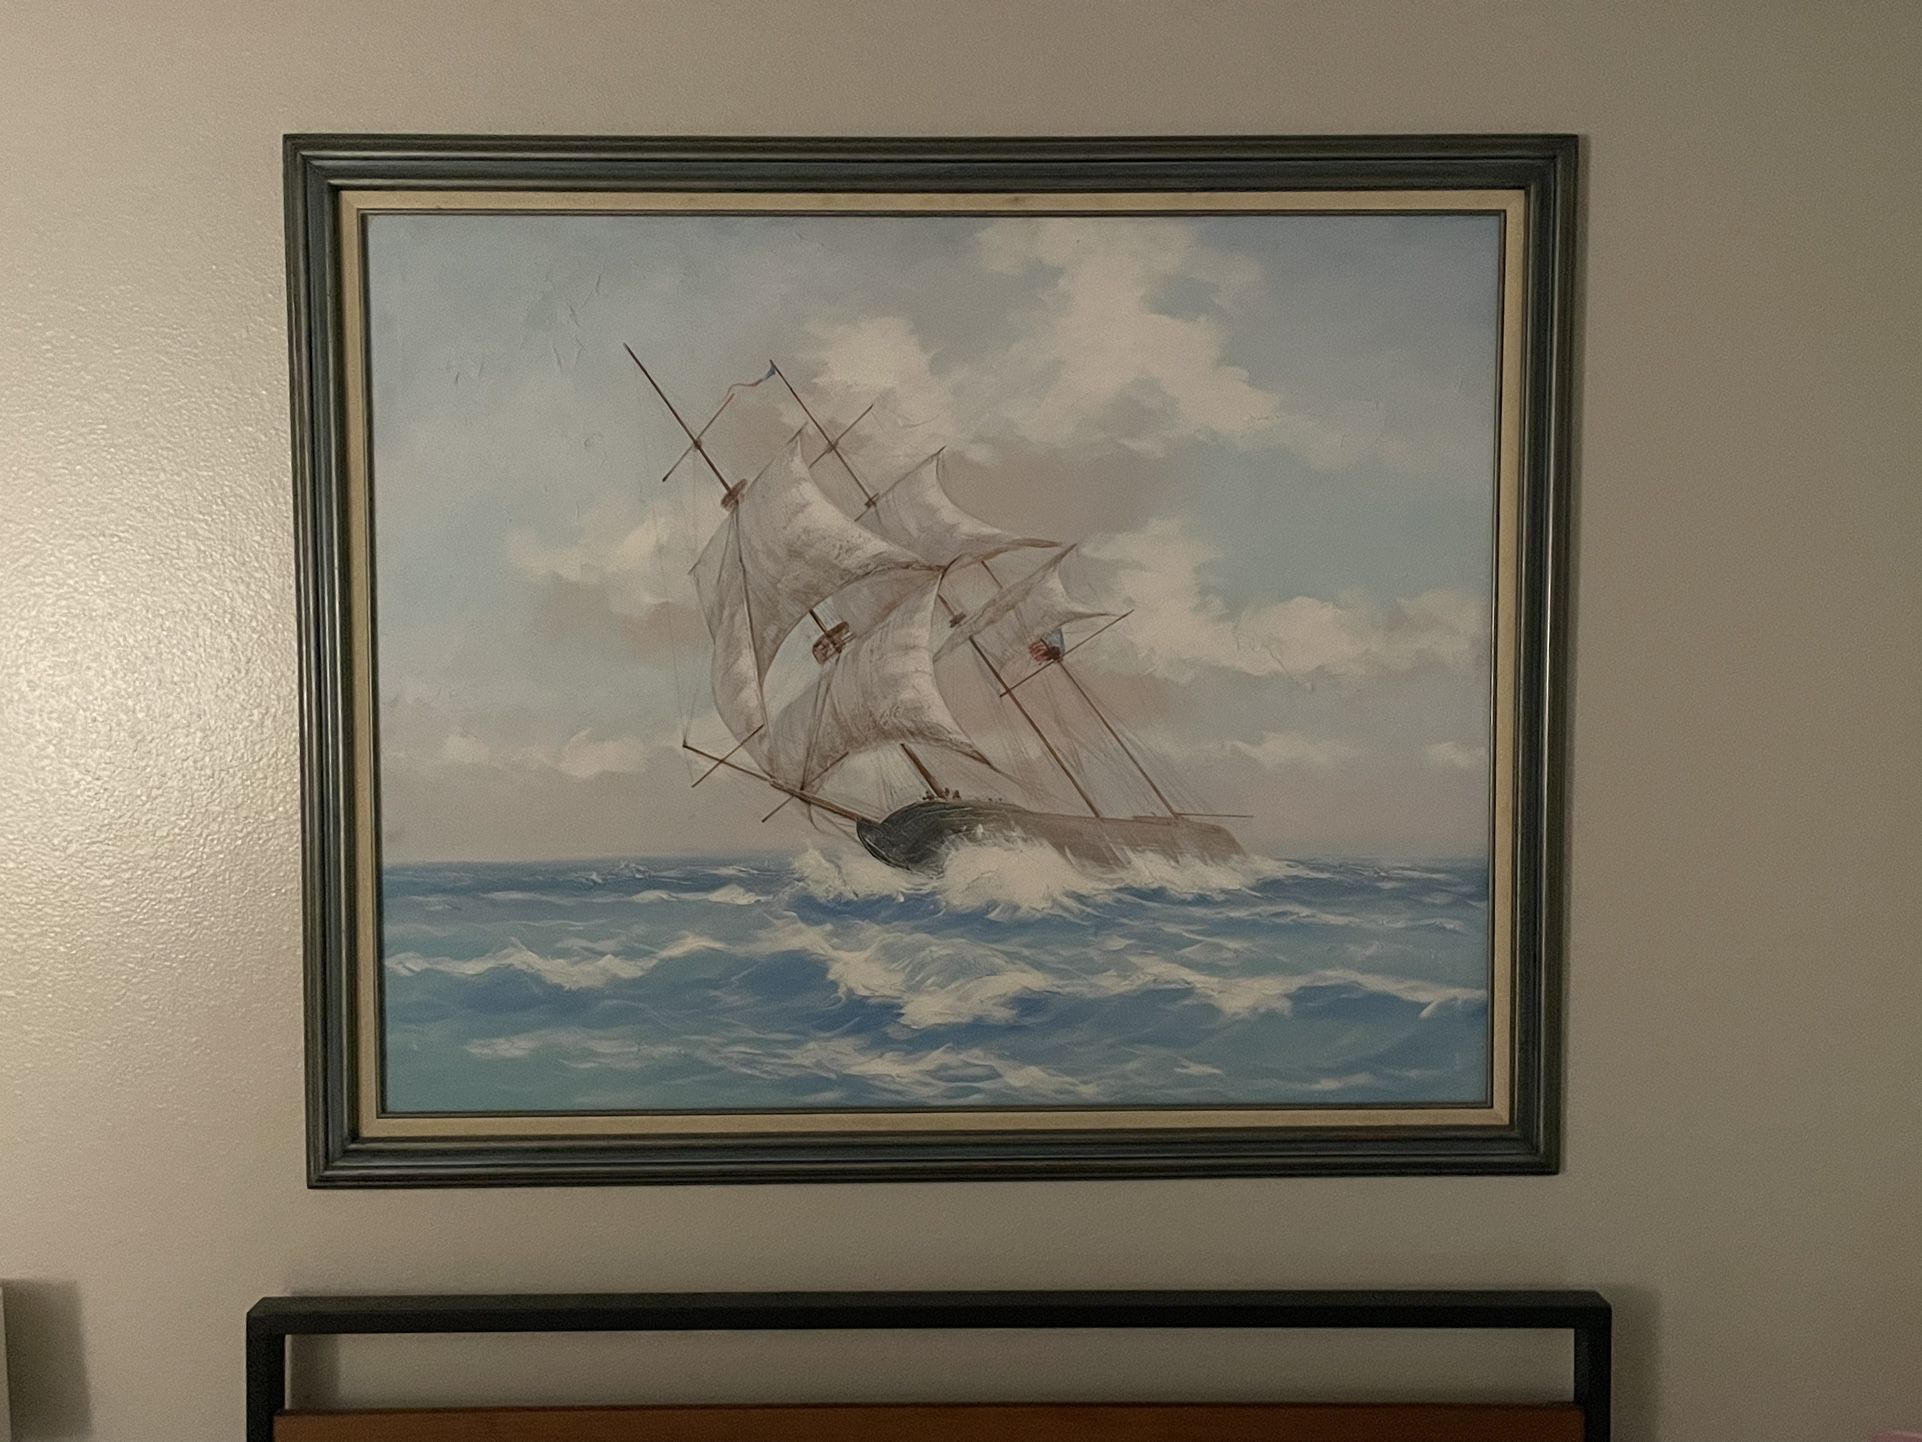 Large Antique Ship Painting 